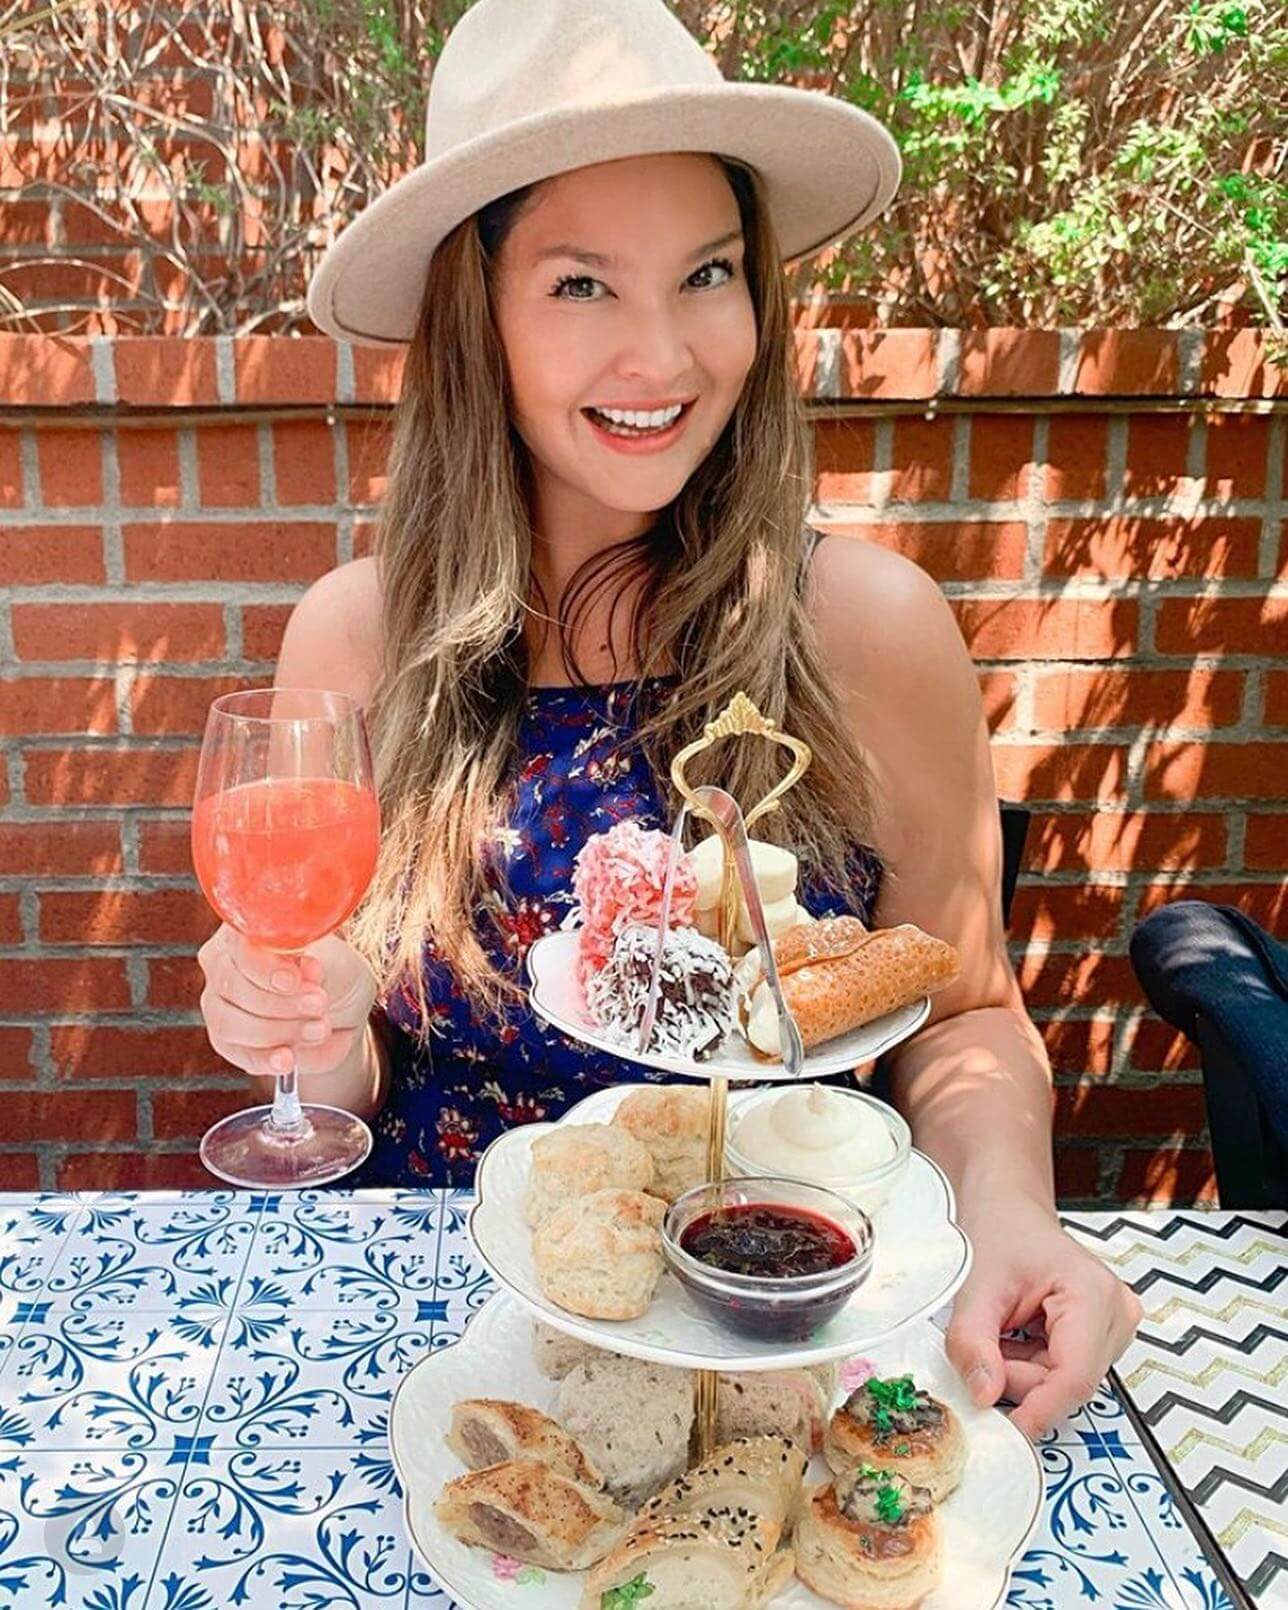 woman eats brunch outside with food tower